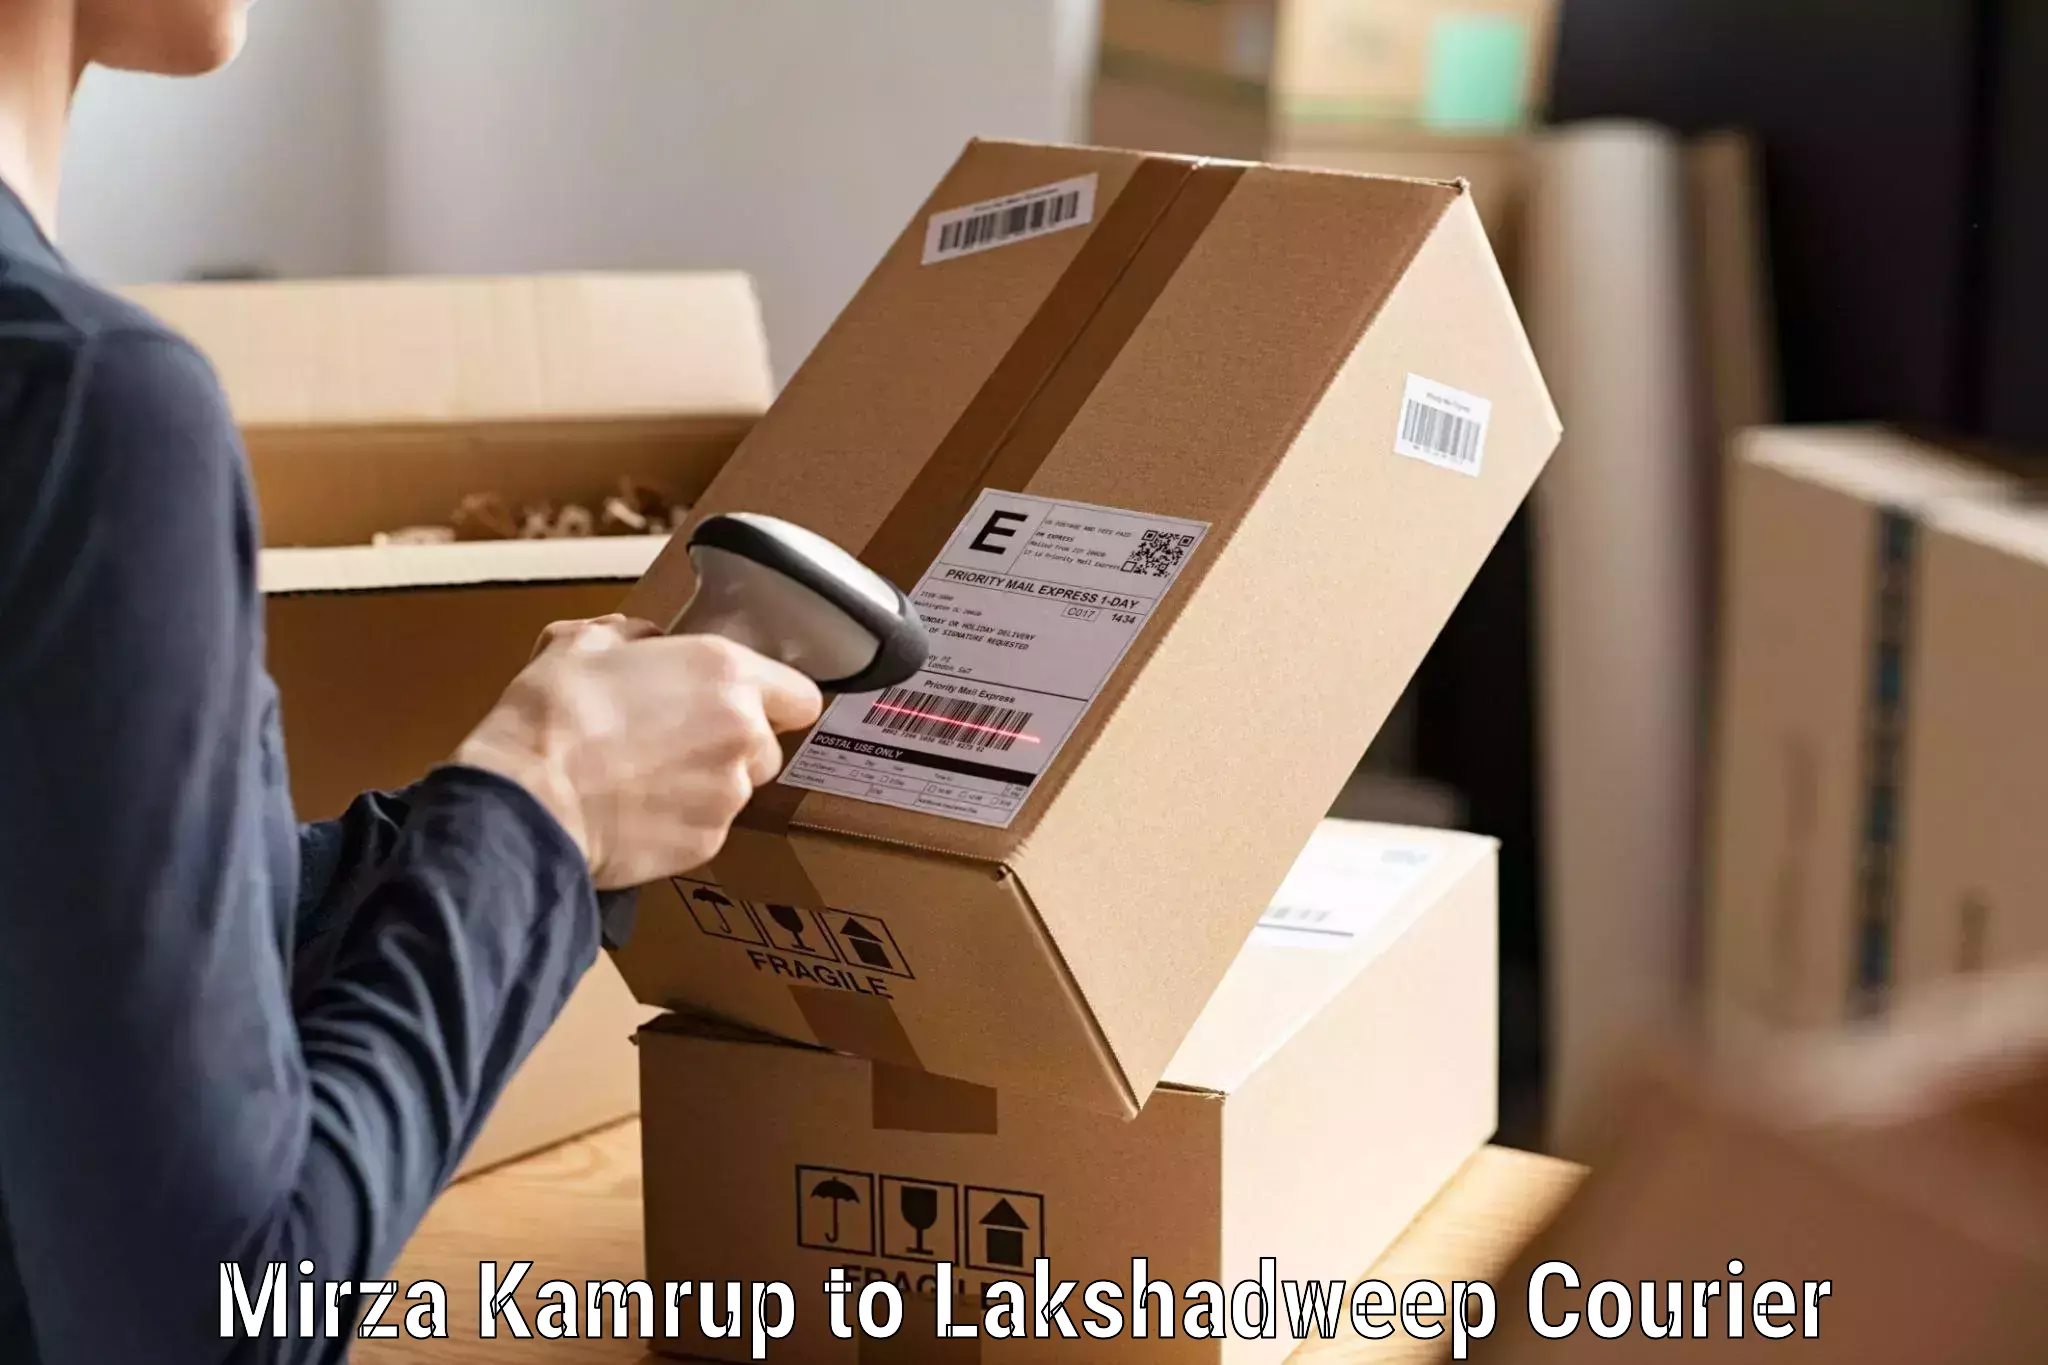 Professional parcel services Mirza Kamrup to Lakshadweep